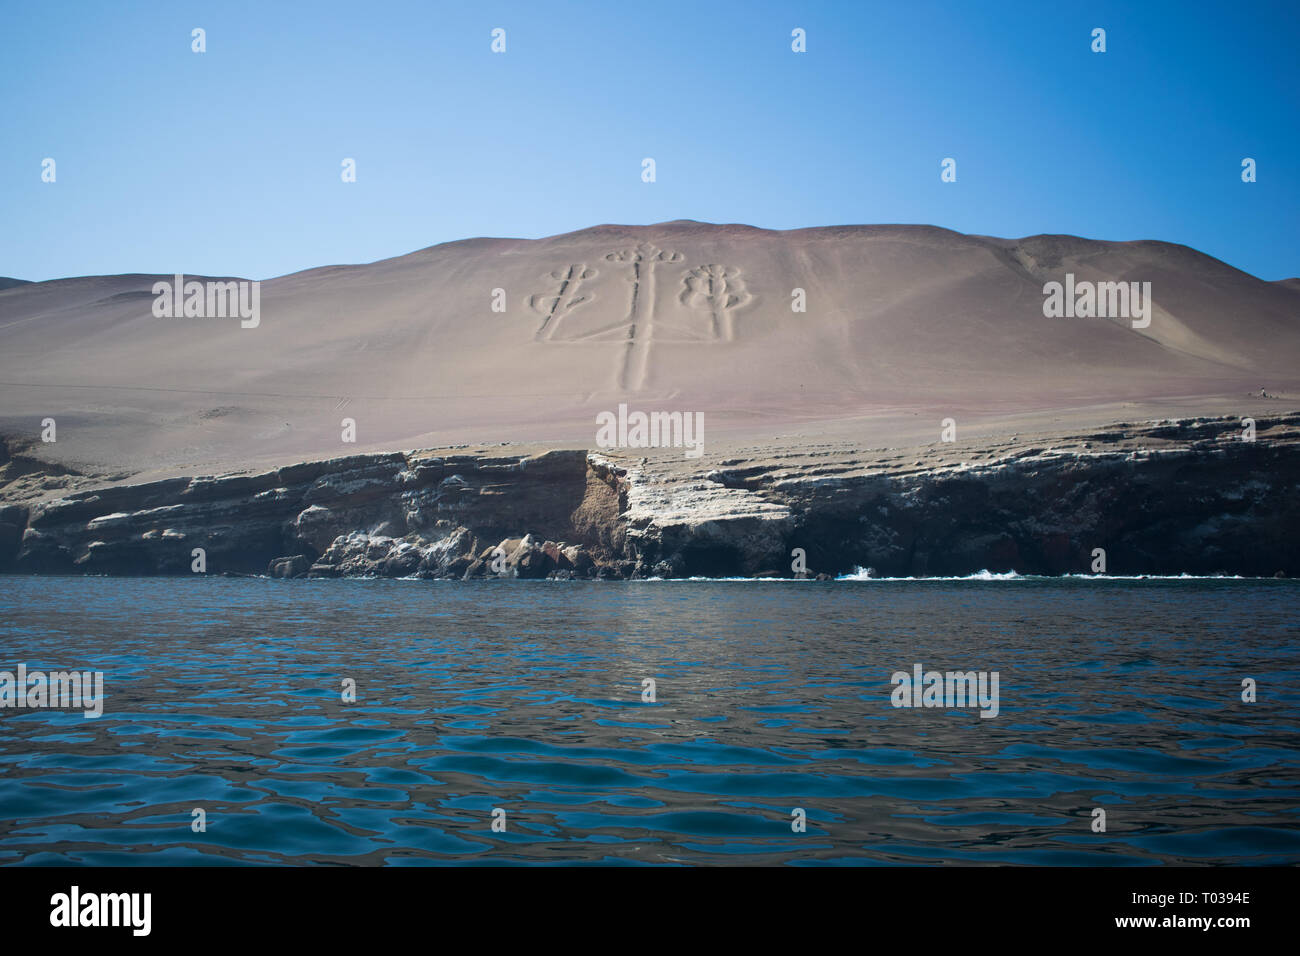 The Candelabra, located in Paracas, Peru, is a famous prehistoric geoglyph dating back to 200 BCE. Stock Photo